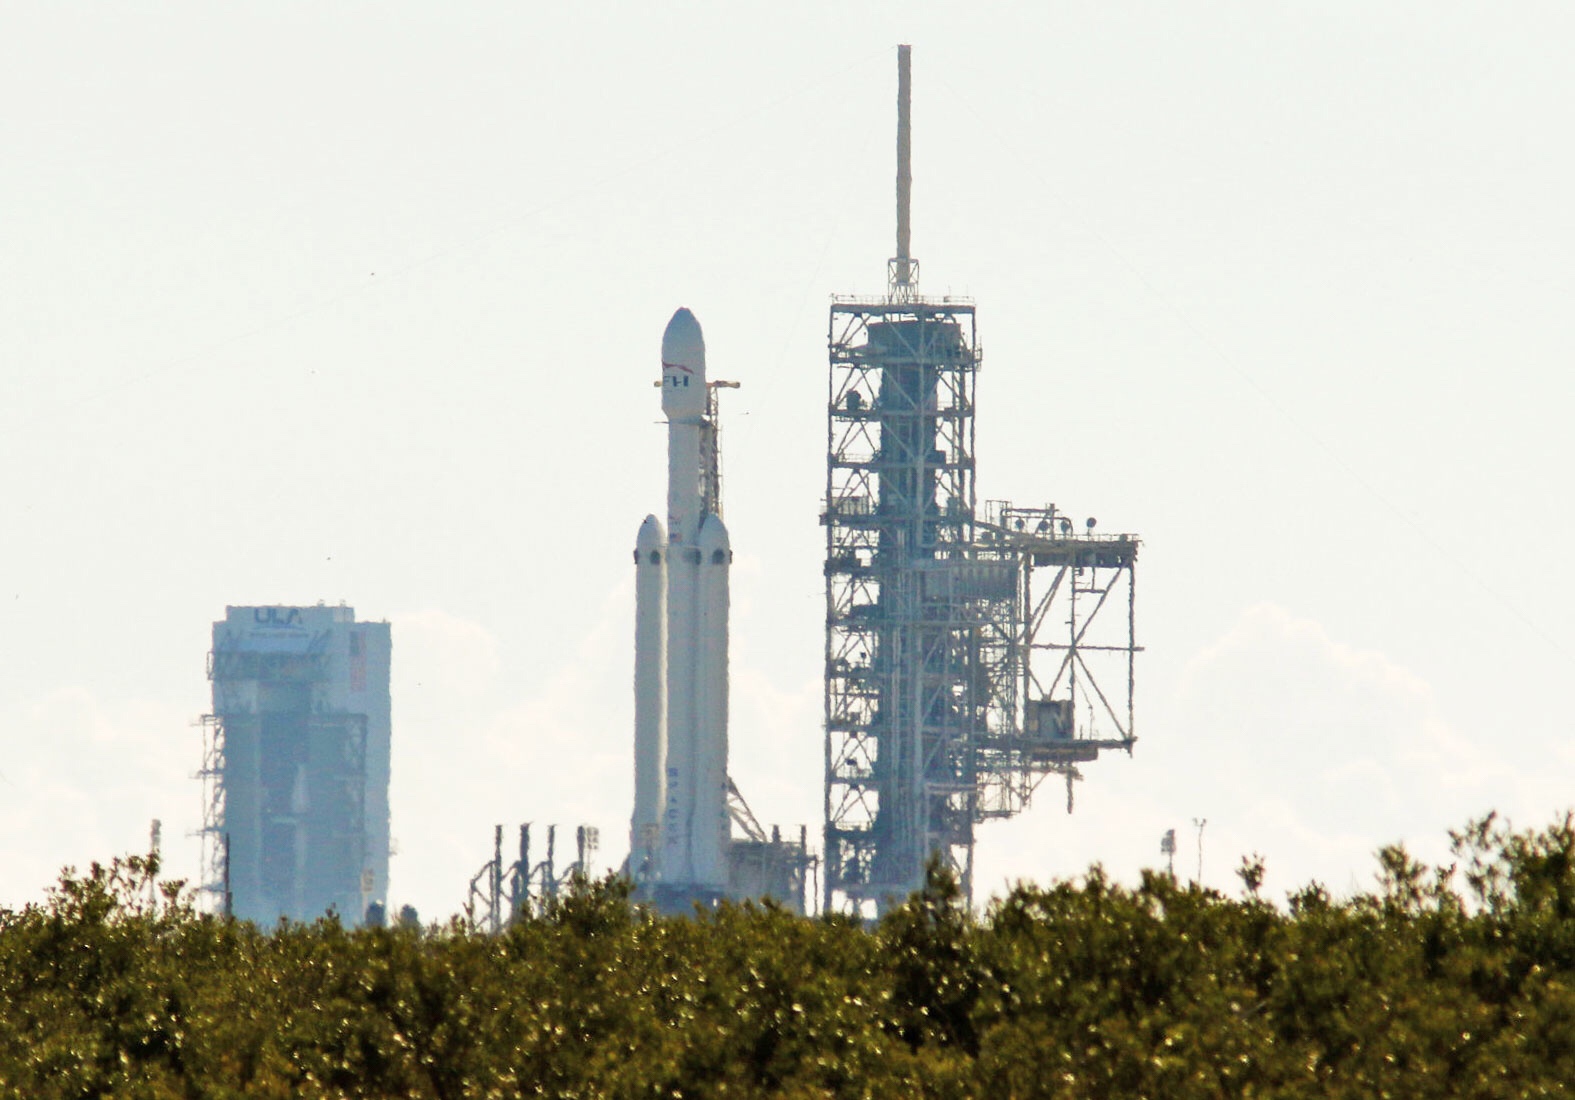 Unfortunately, SpaceX’s Falcon Heavy can’t launch while government is shutdown